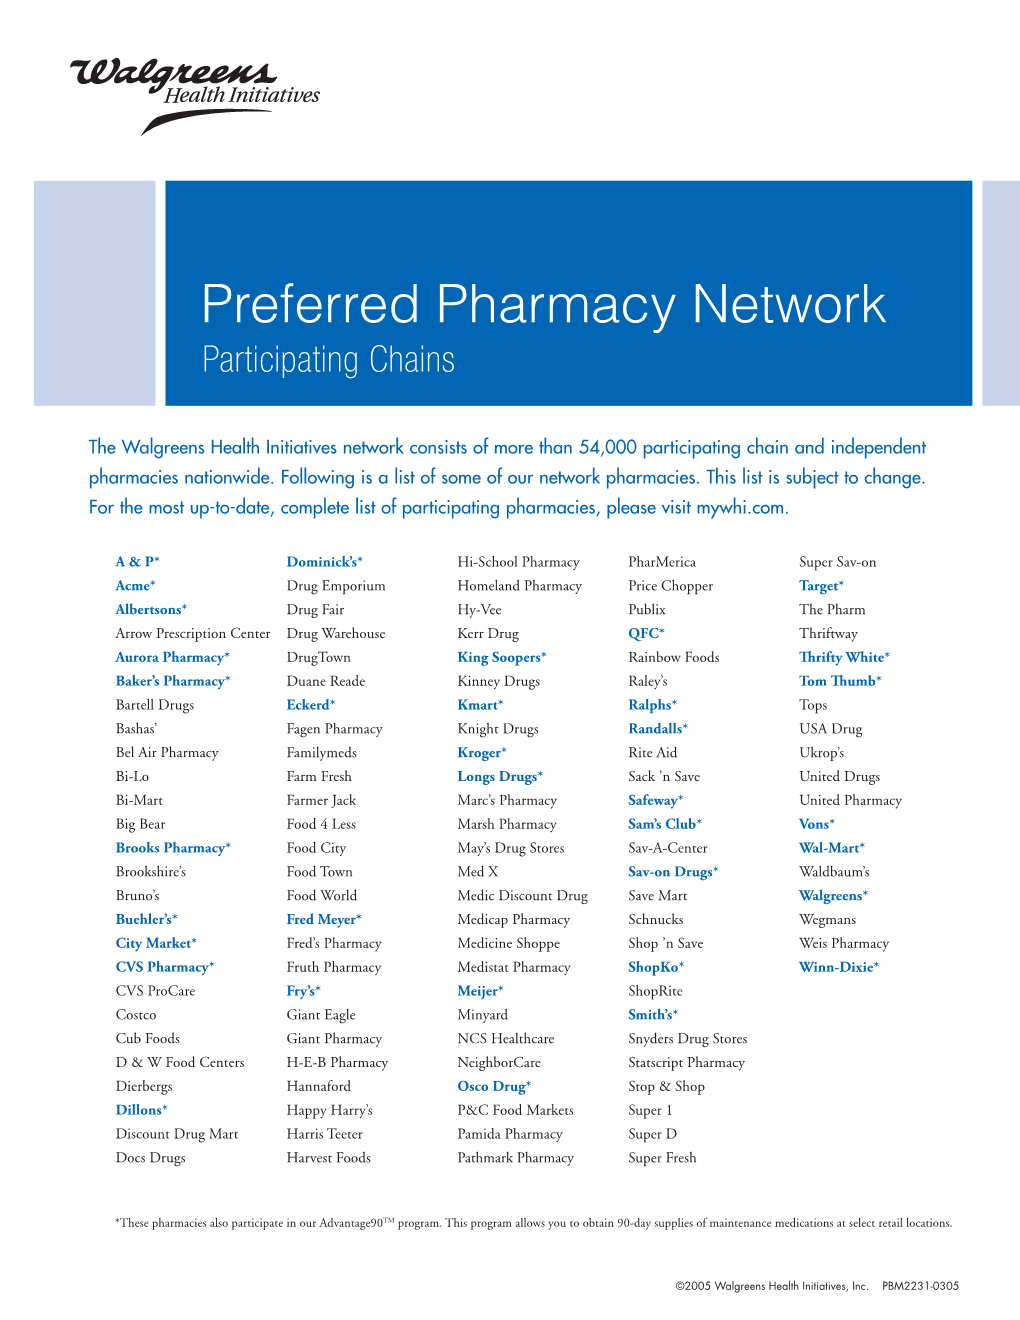 Preferred Pharmacy Network Participating Chains